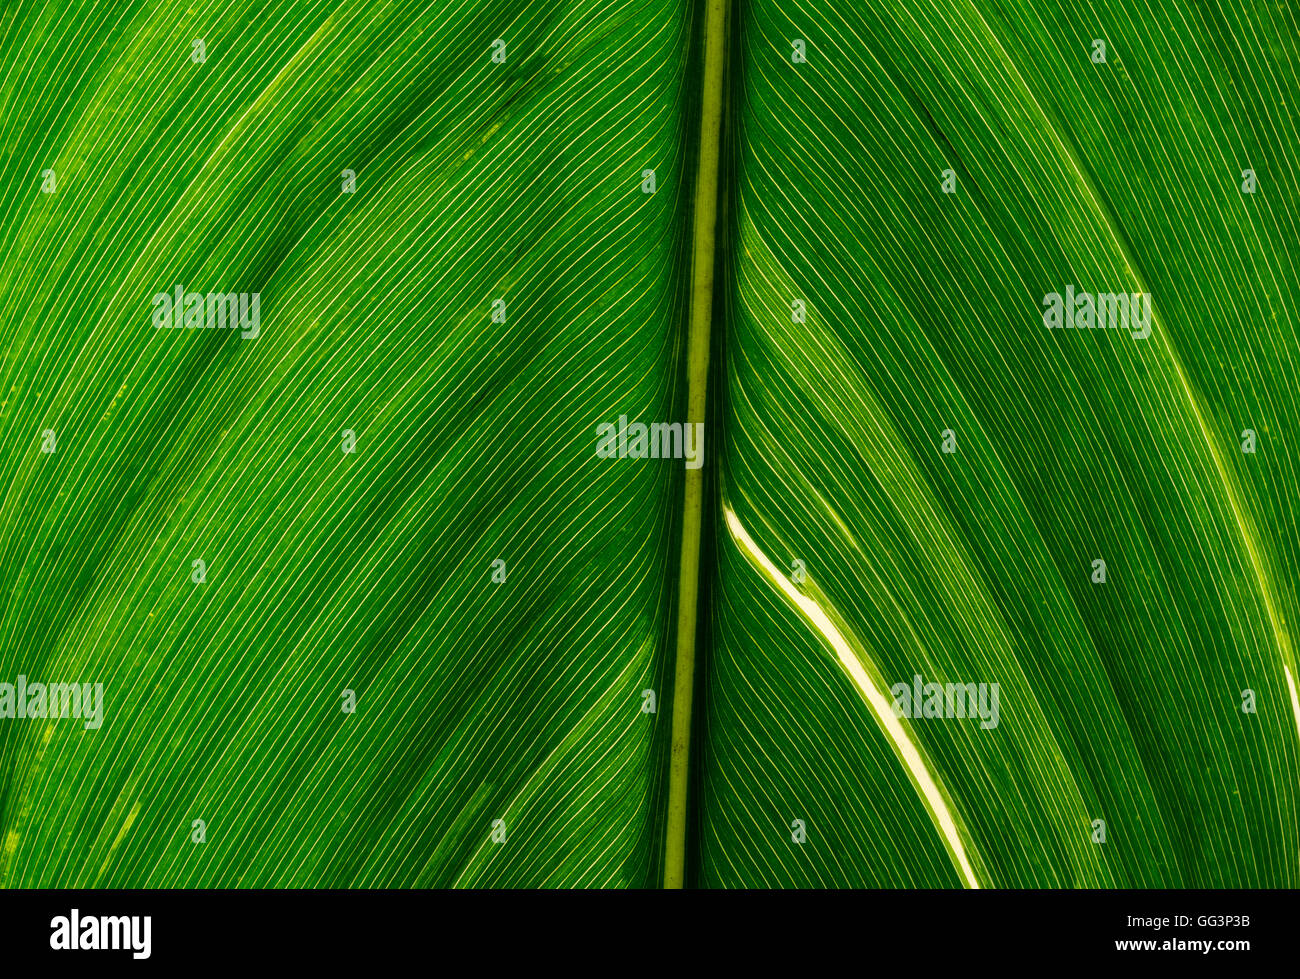 very rough view of a achira leaf Stock Photo